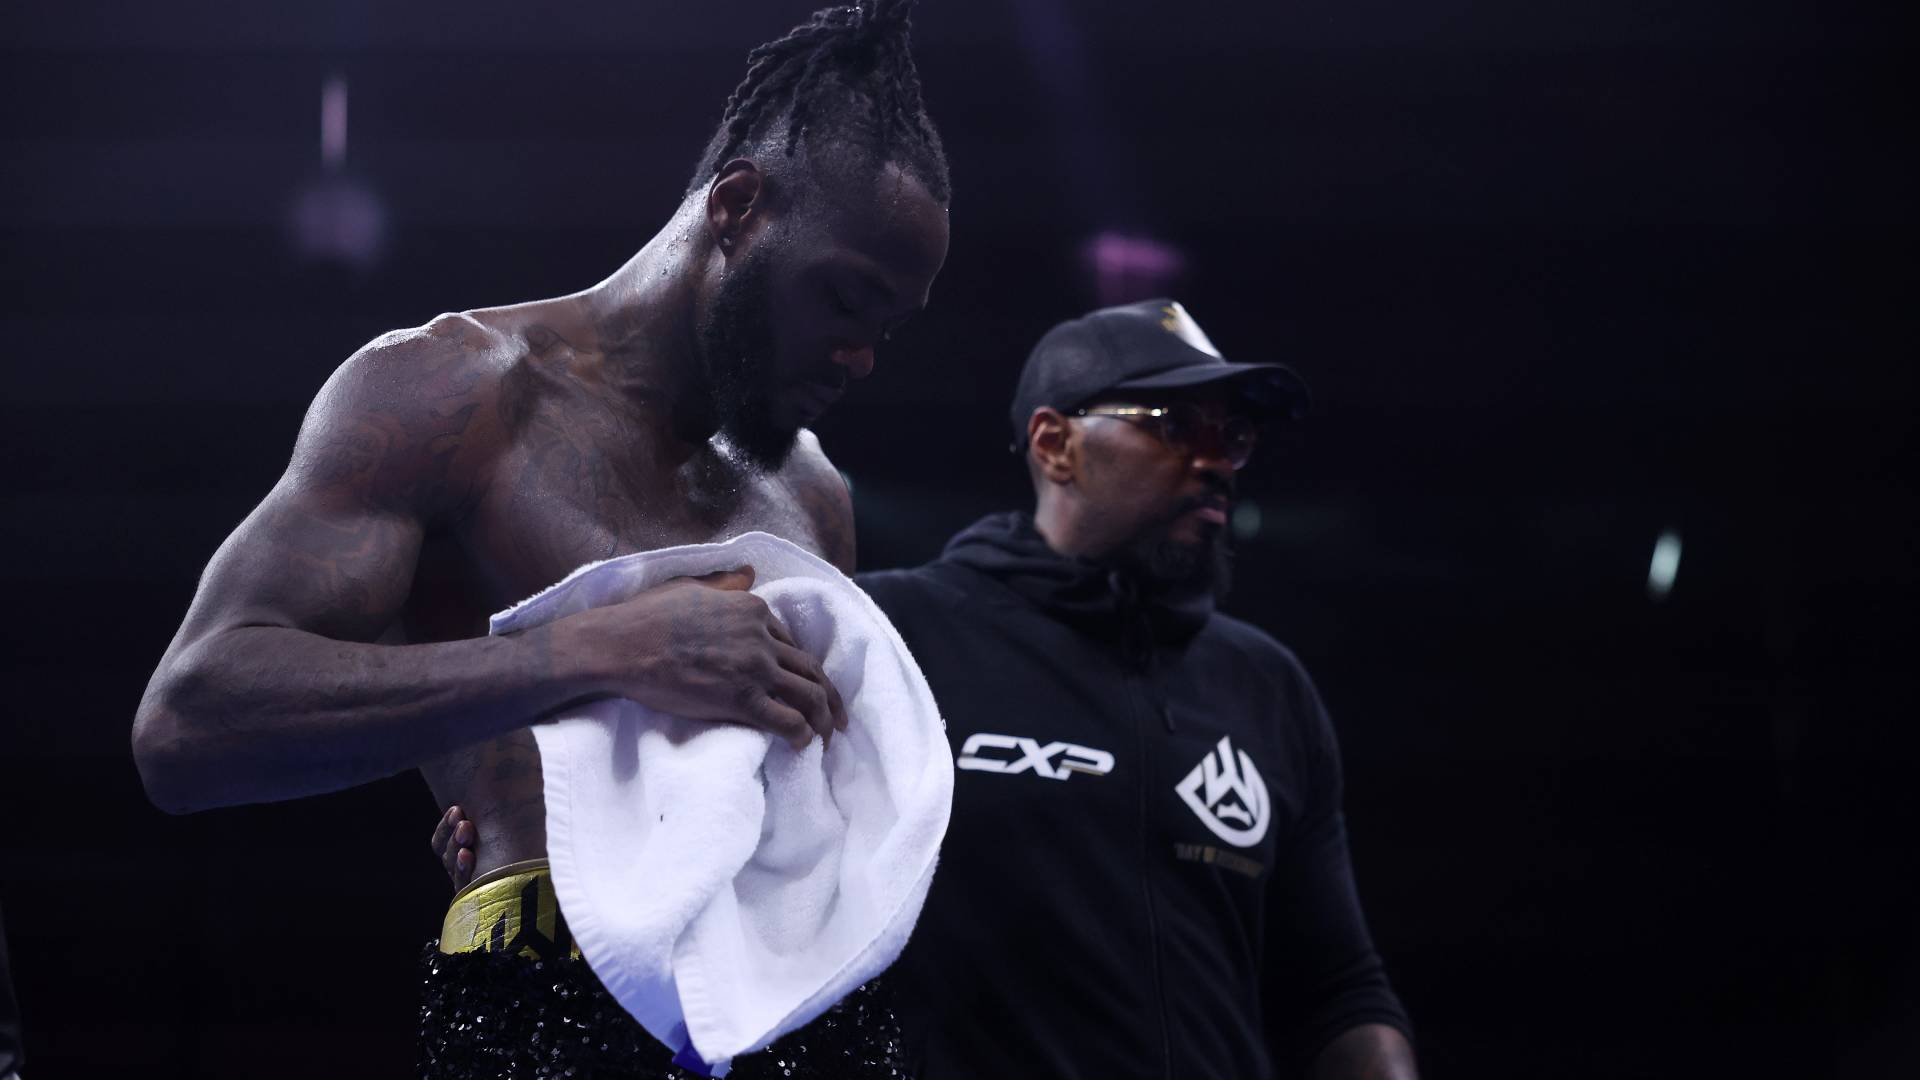 Trainer urges Deontay Wilder to not think about fighting former world champion next